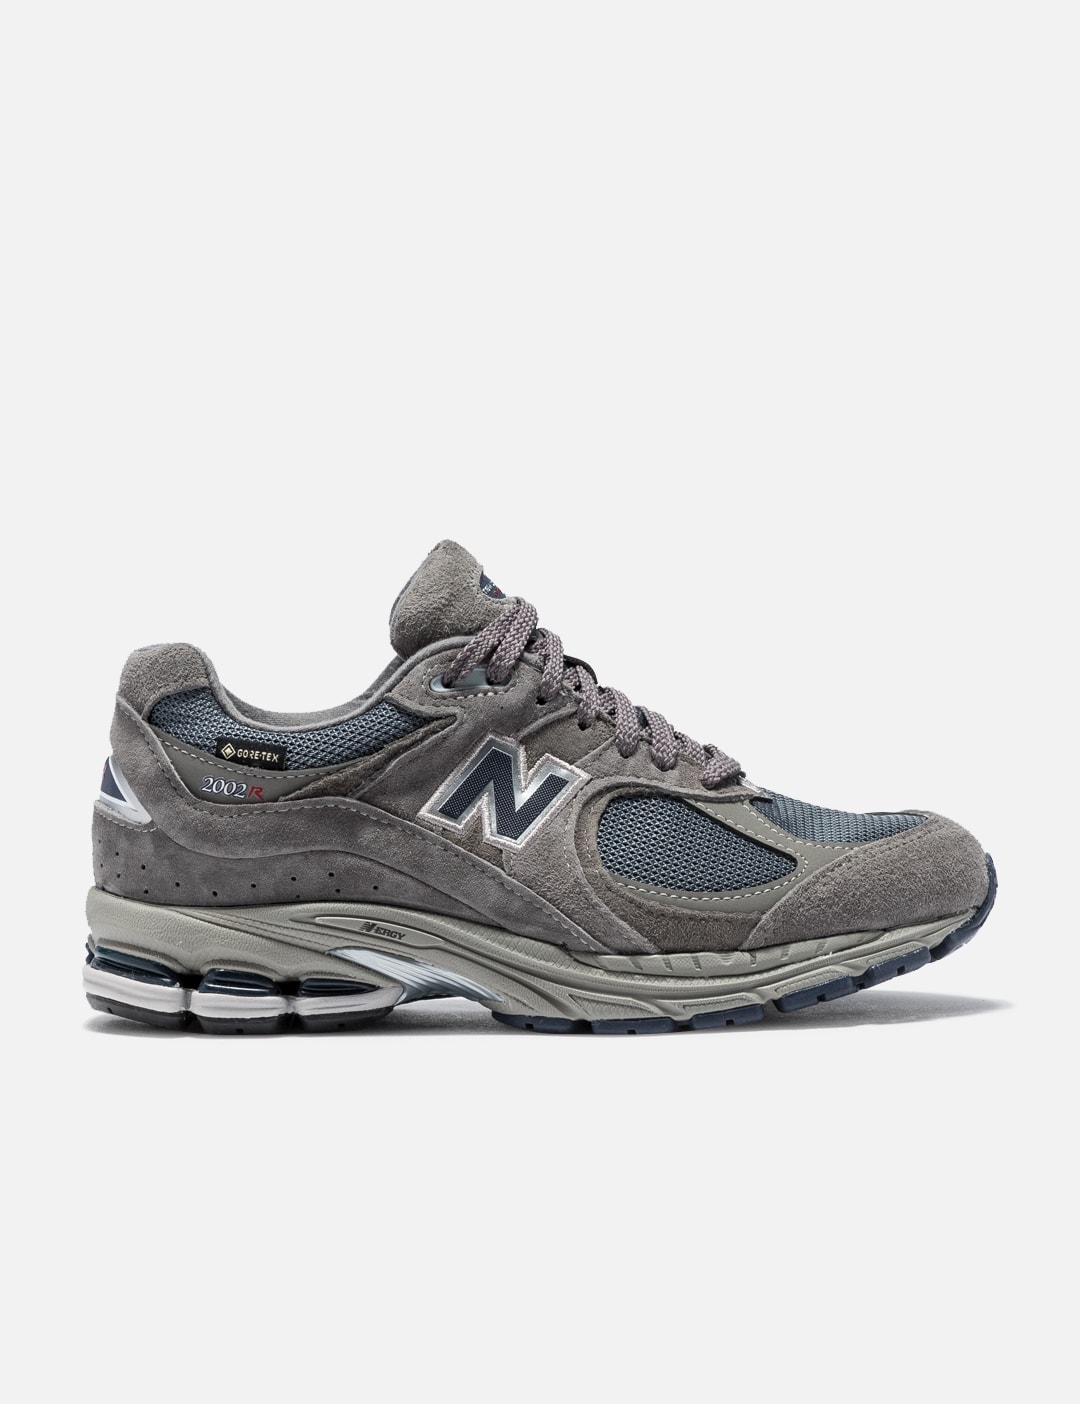 New Balance - 2002RX | HBX - Globally Curated Fashion and Lifestyle by ...